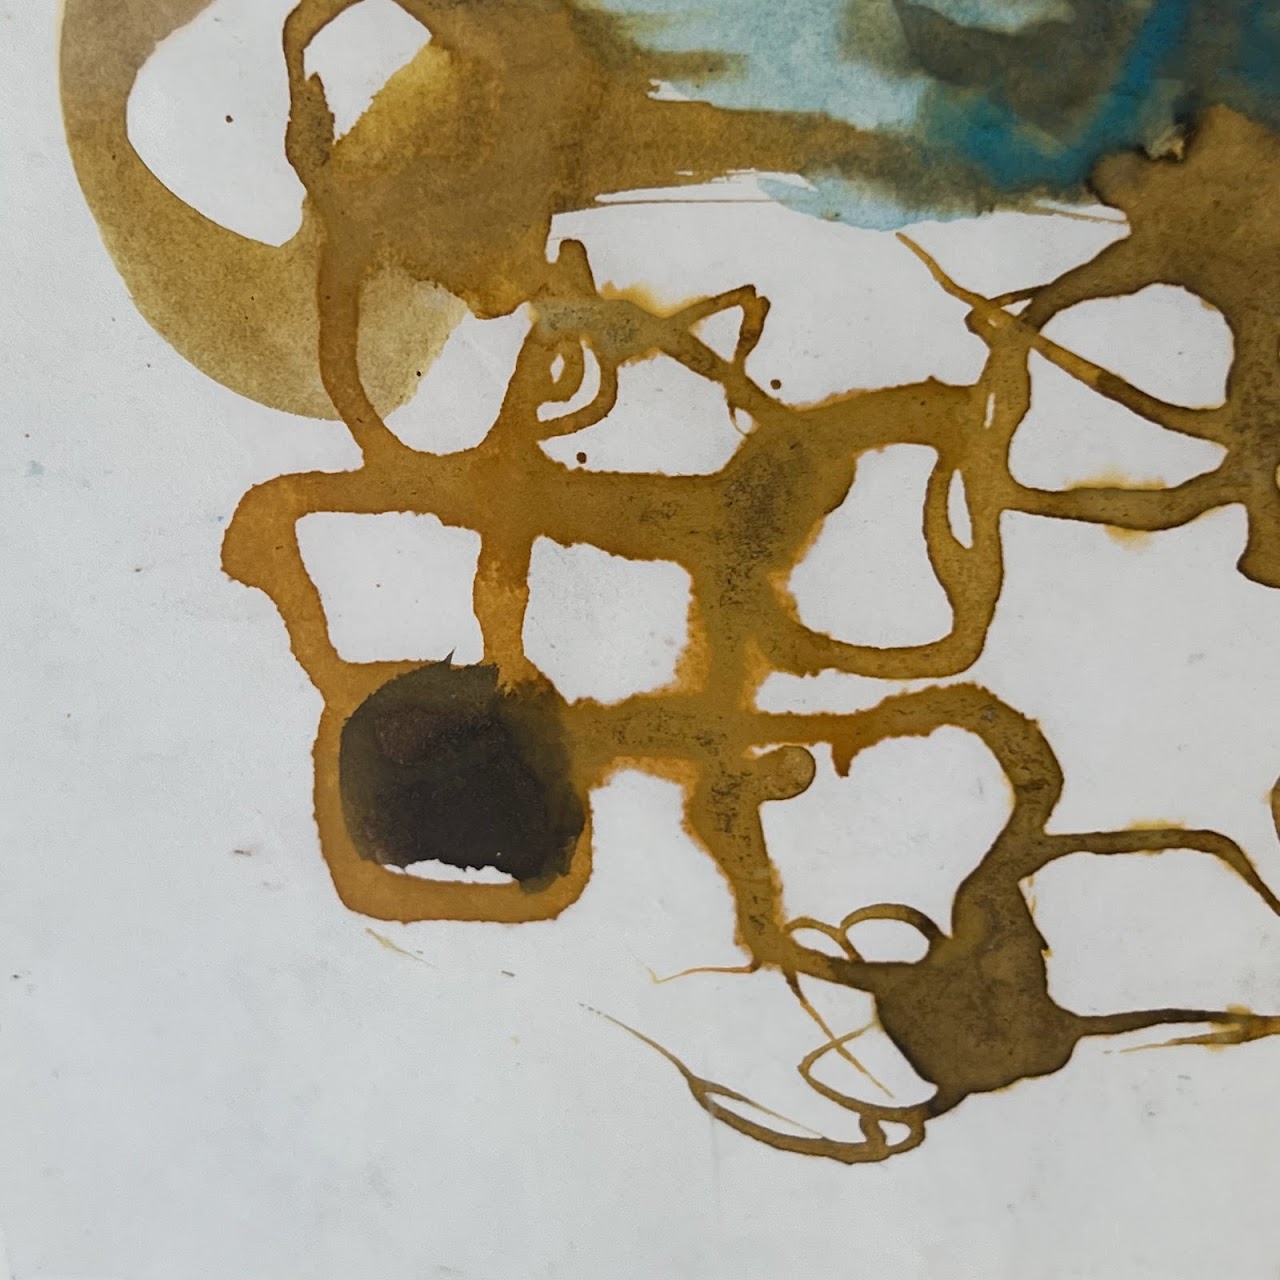 John Illig 'Untitled (Yellow)' Abstract Watercolor Painting, 1989